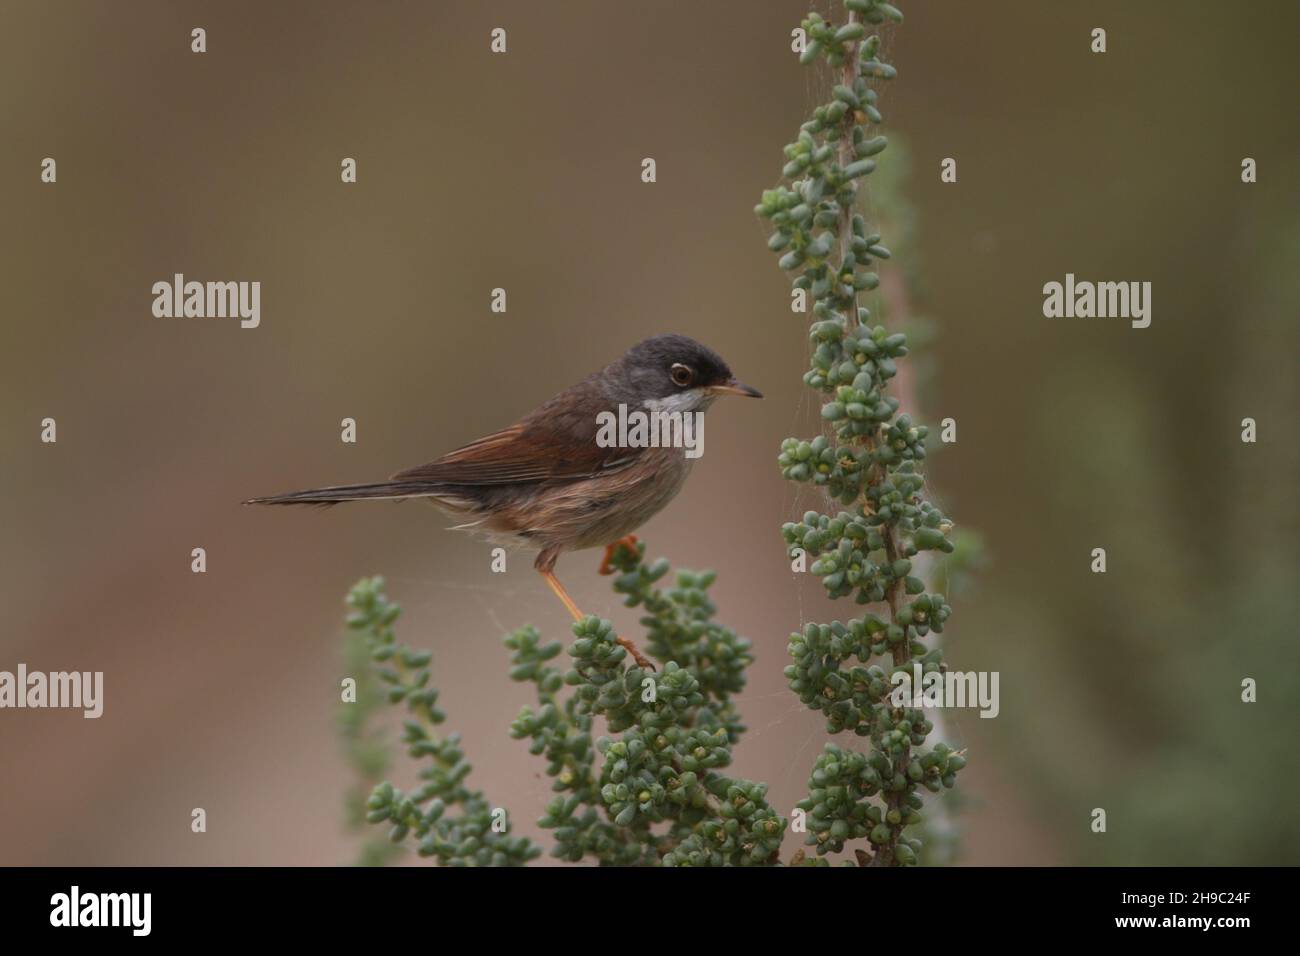 Spectacled warbler in typical habitat of low scrub in a dry semi arid environment on Lanzarote where they are a resident species. Stock Photo